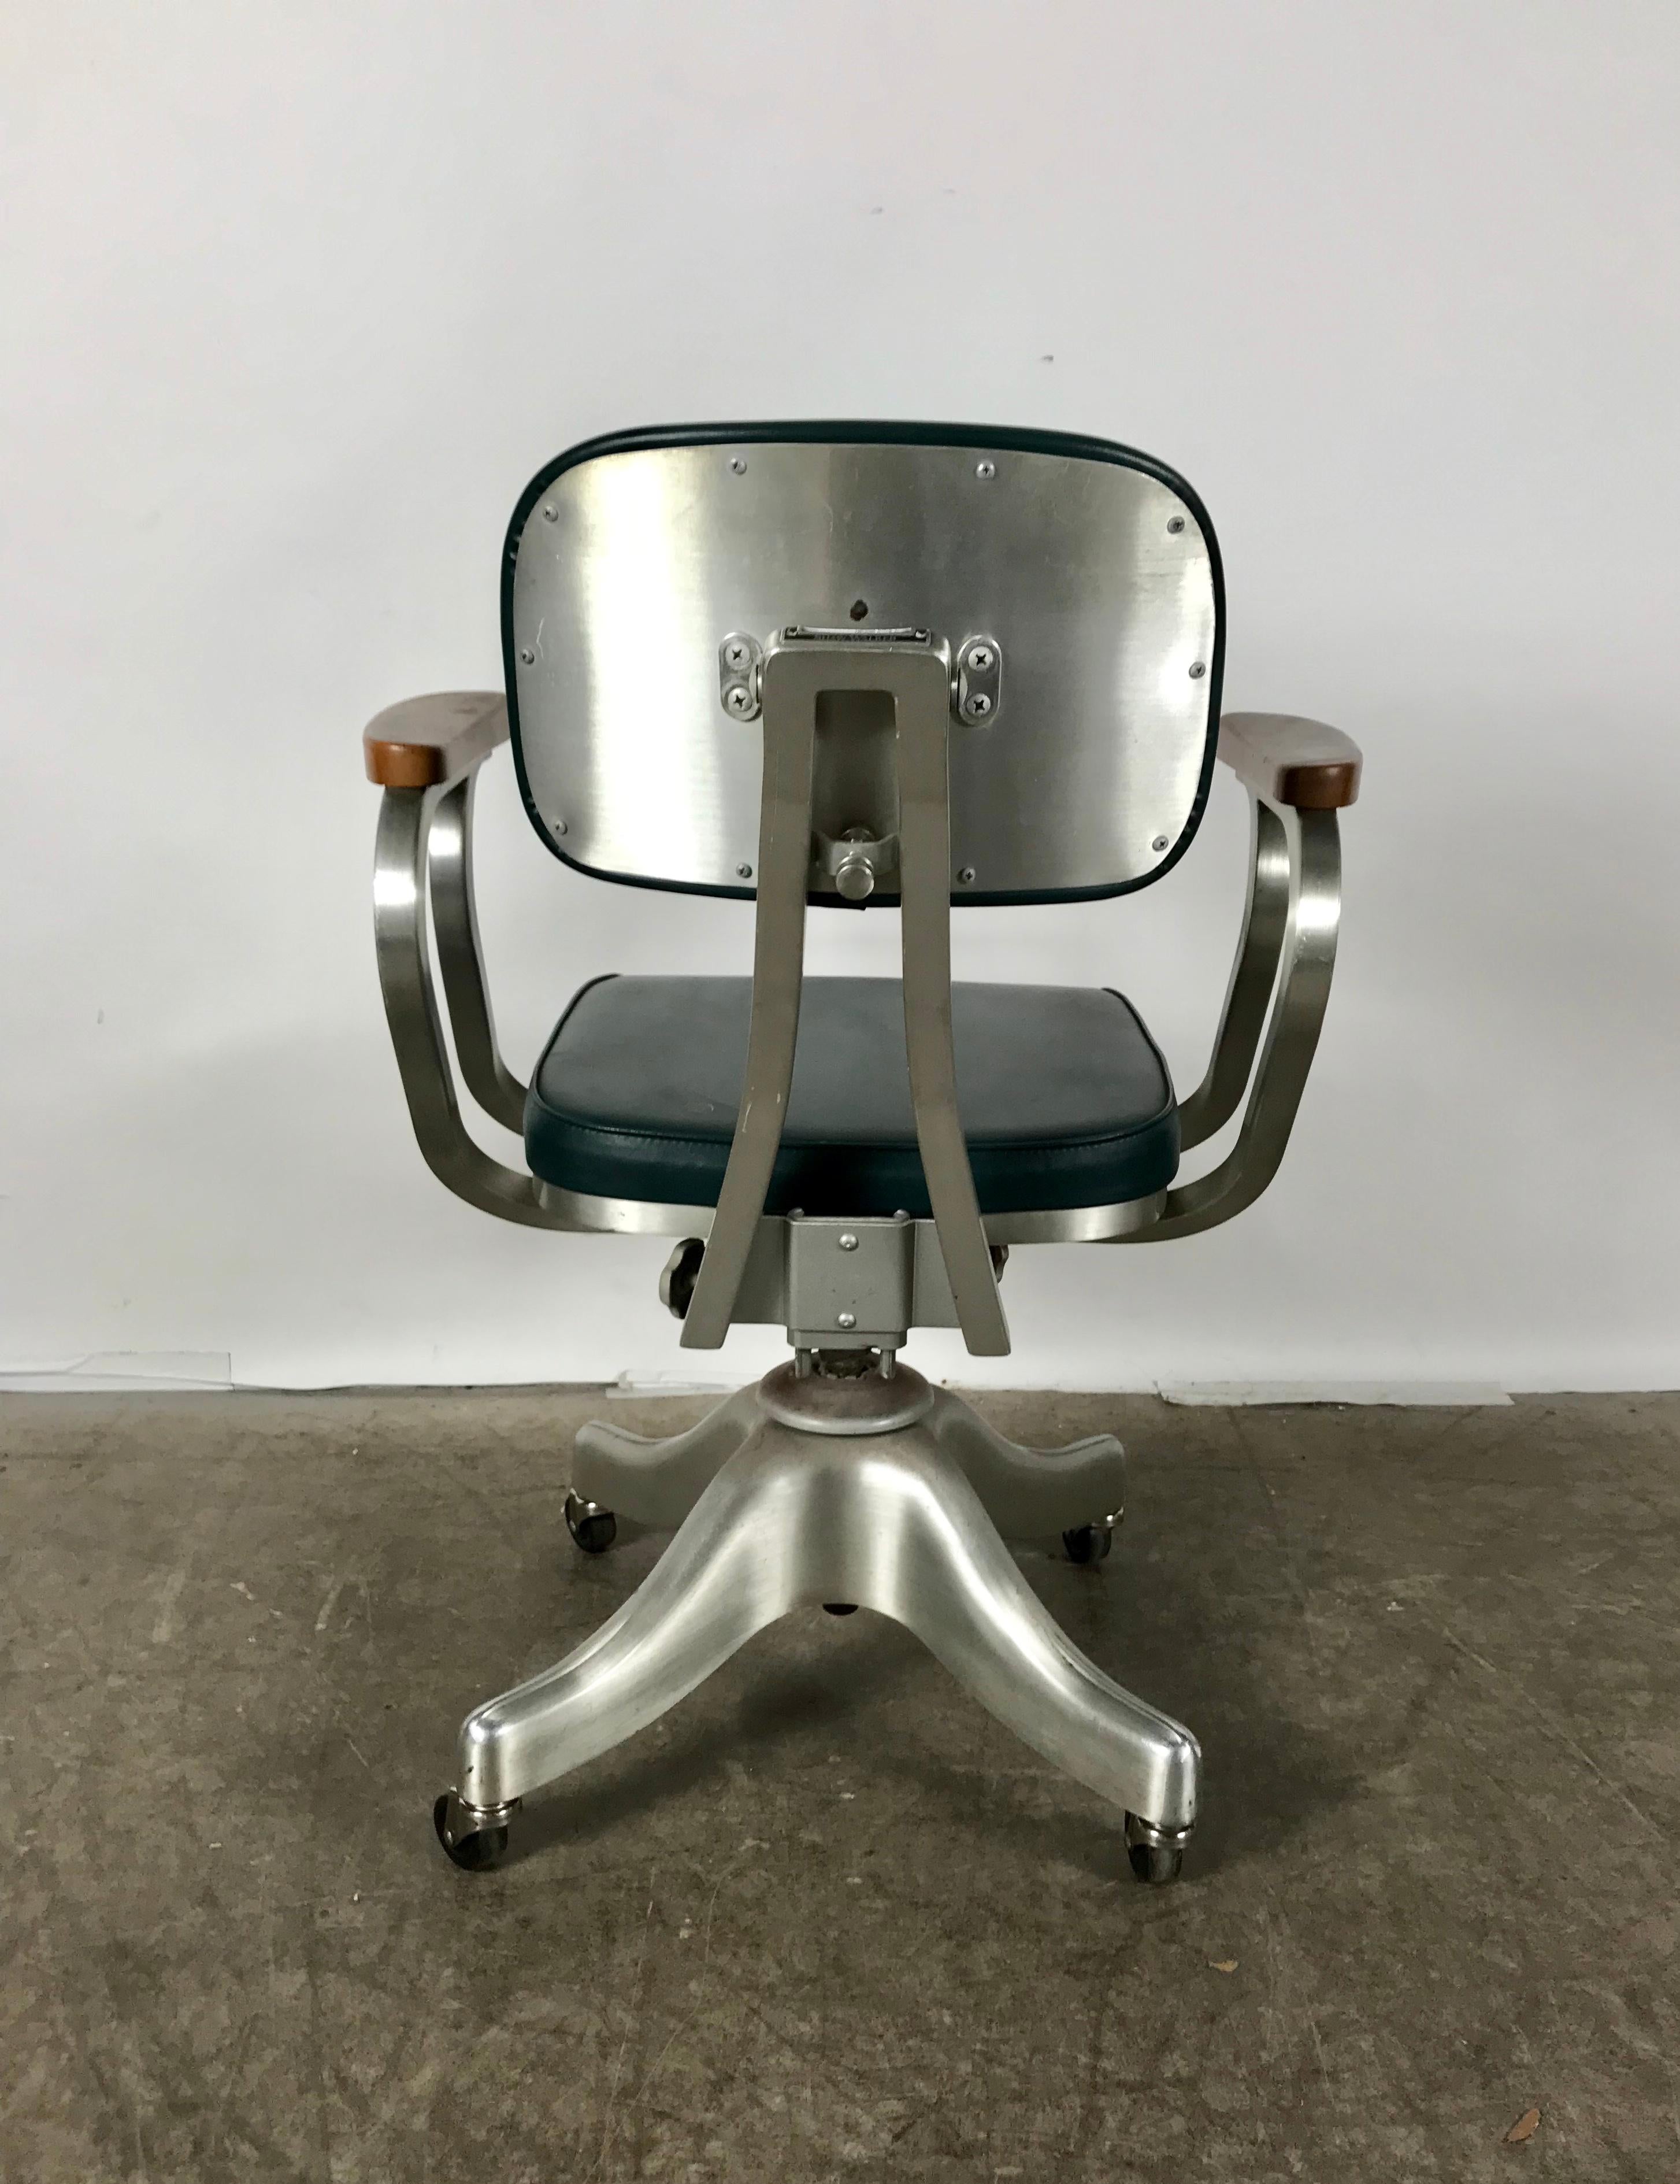 Shaw Walker aluminum rolling desk or task armchair, late 1940s. Remarkably, pristine original condition, Polished aluminum Propeller base,stylized arms. Maple or birch wood arm rests, original green Naugahyd, fully adjustable, retains original Shaw